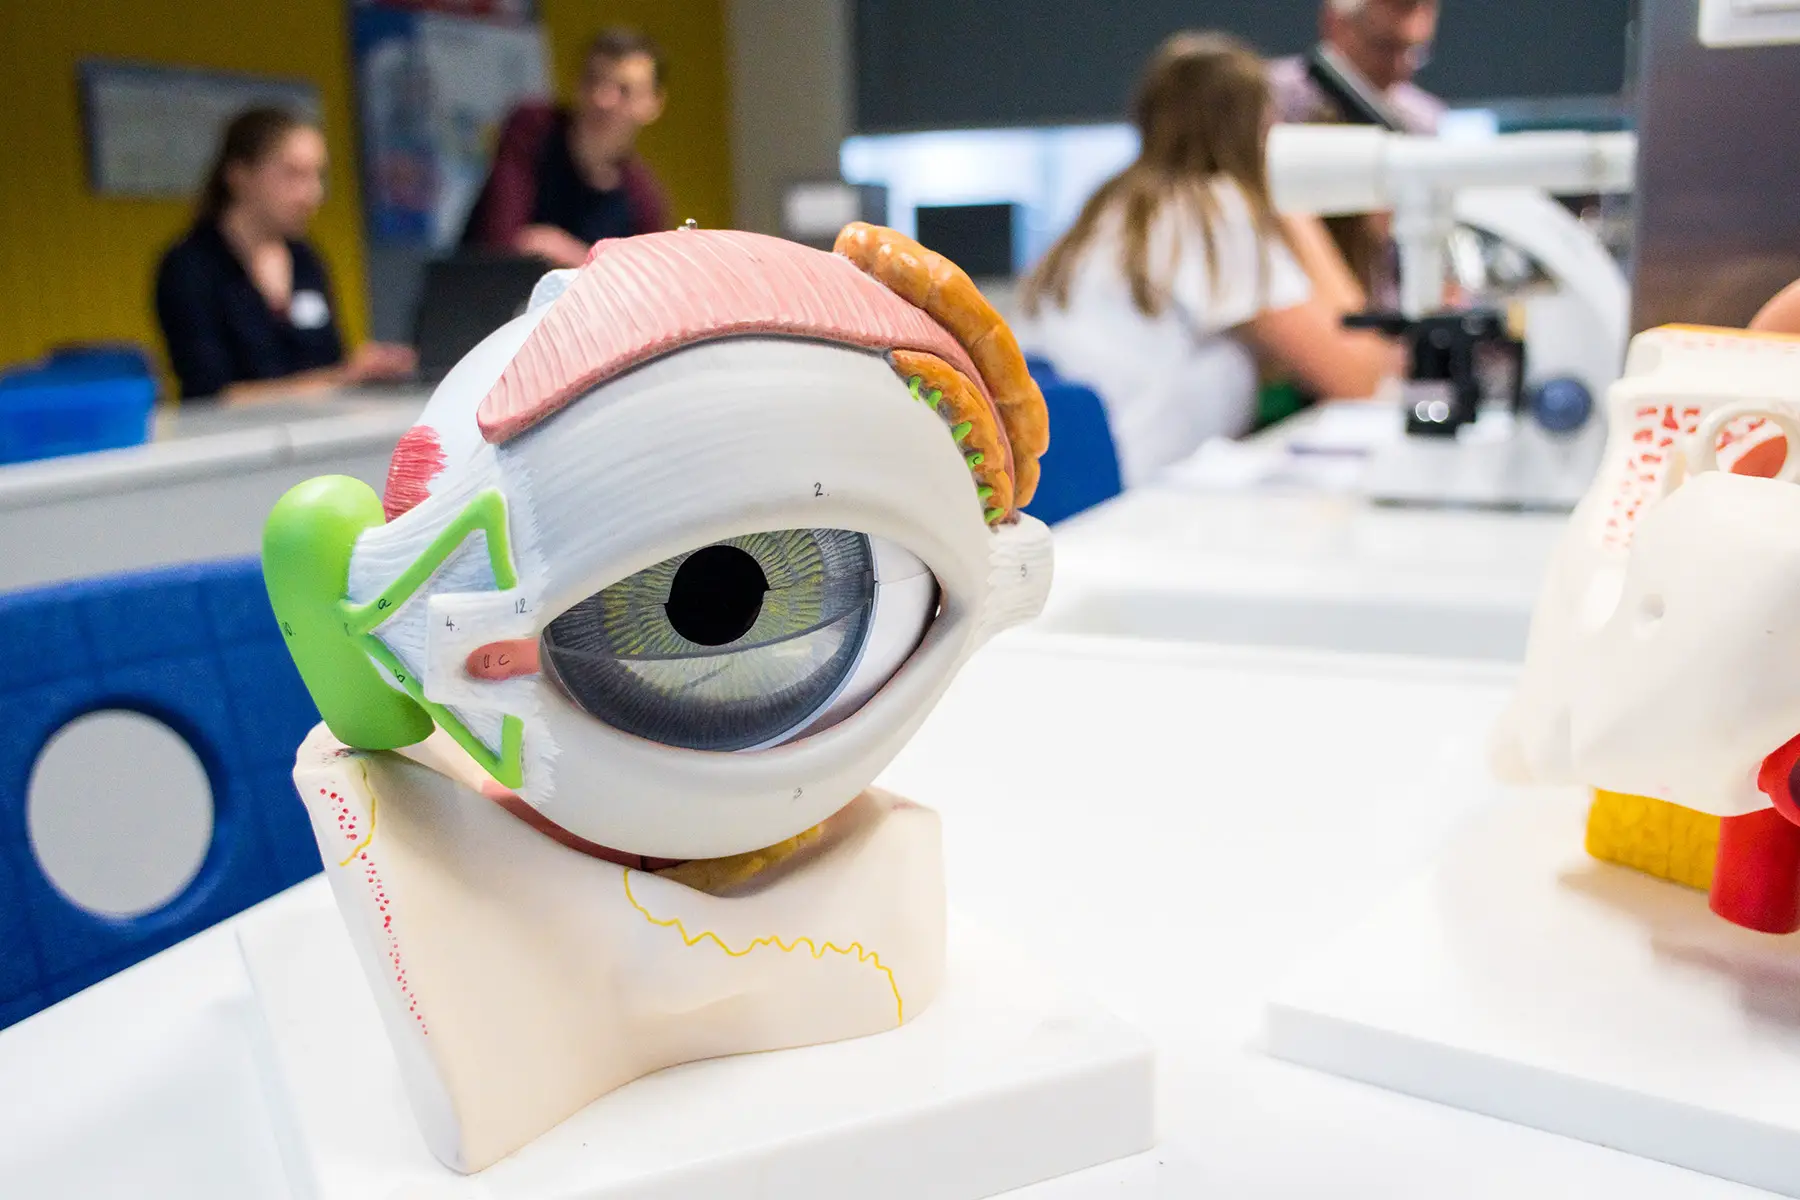 A model of the eye with students out of focus in the background